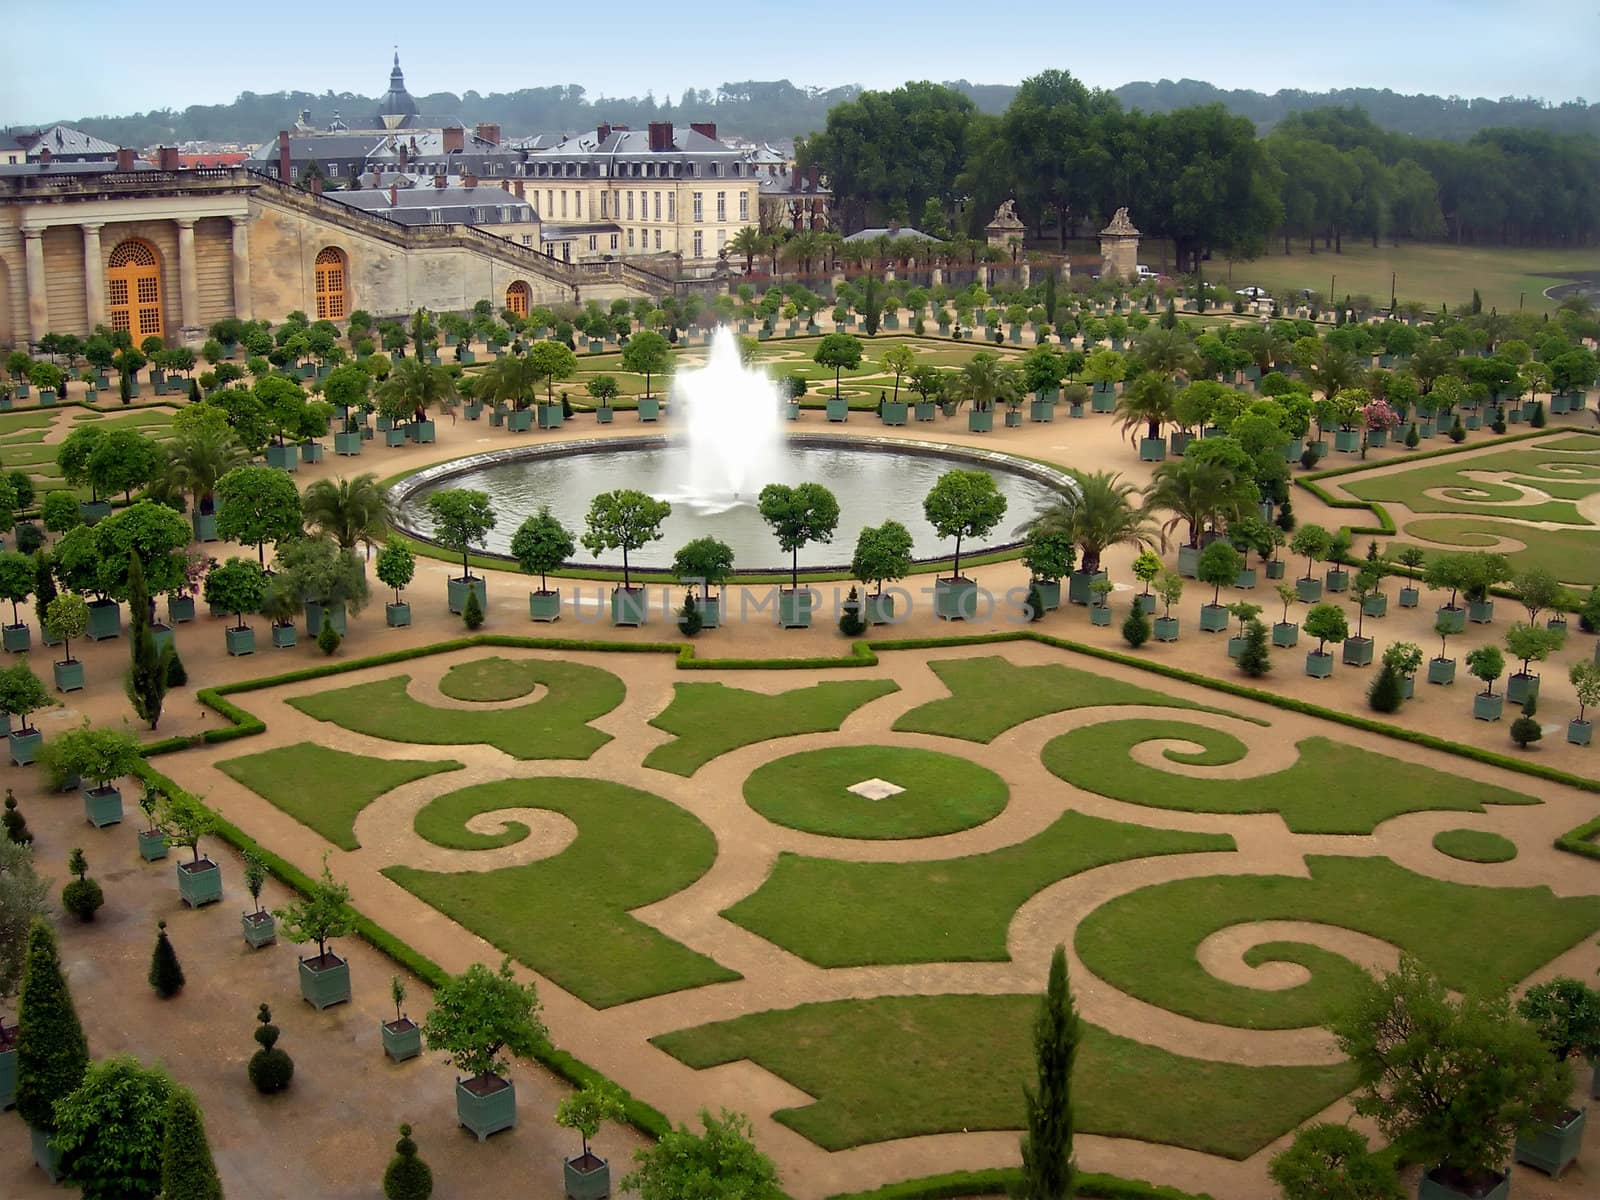           Gardens and a fountain in Versailles in France